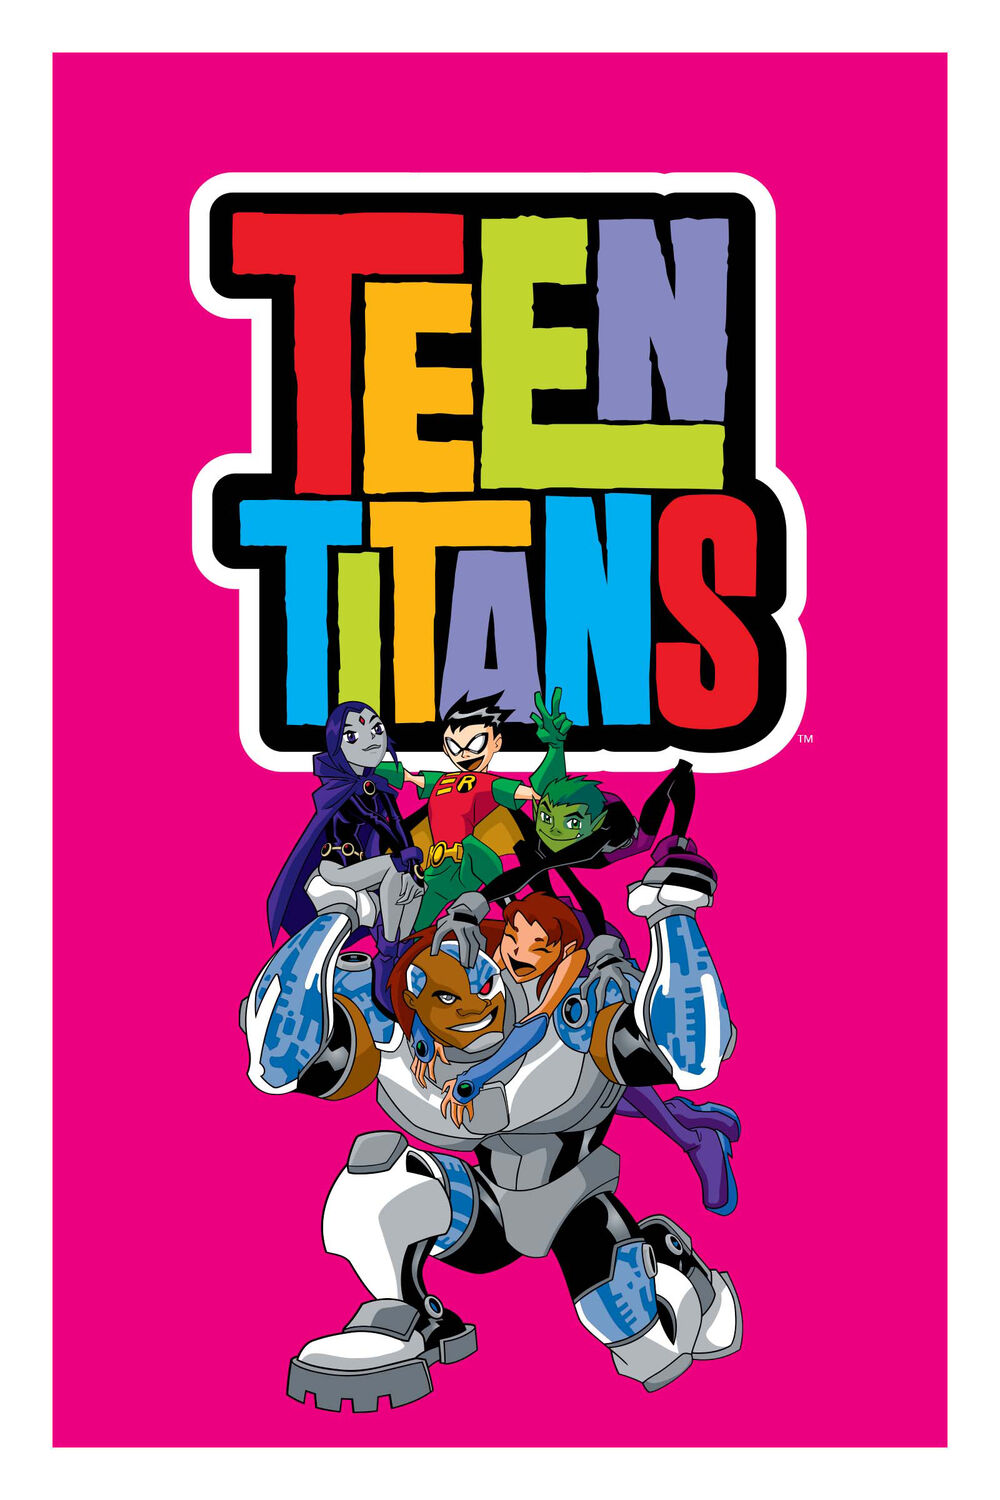 One-On-One, Teen Titans Wiki